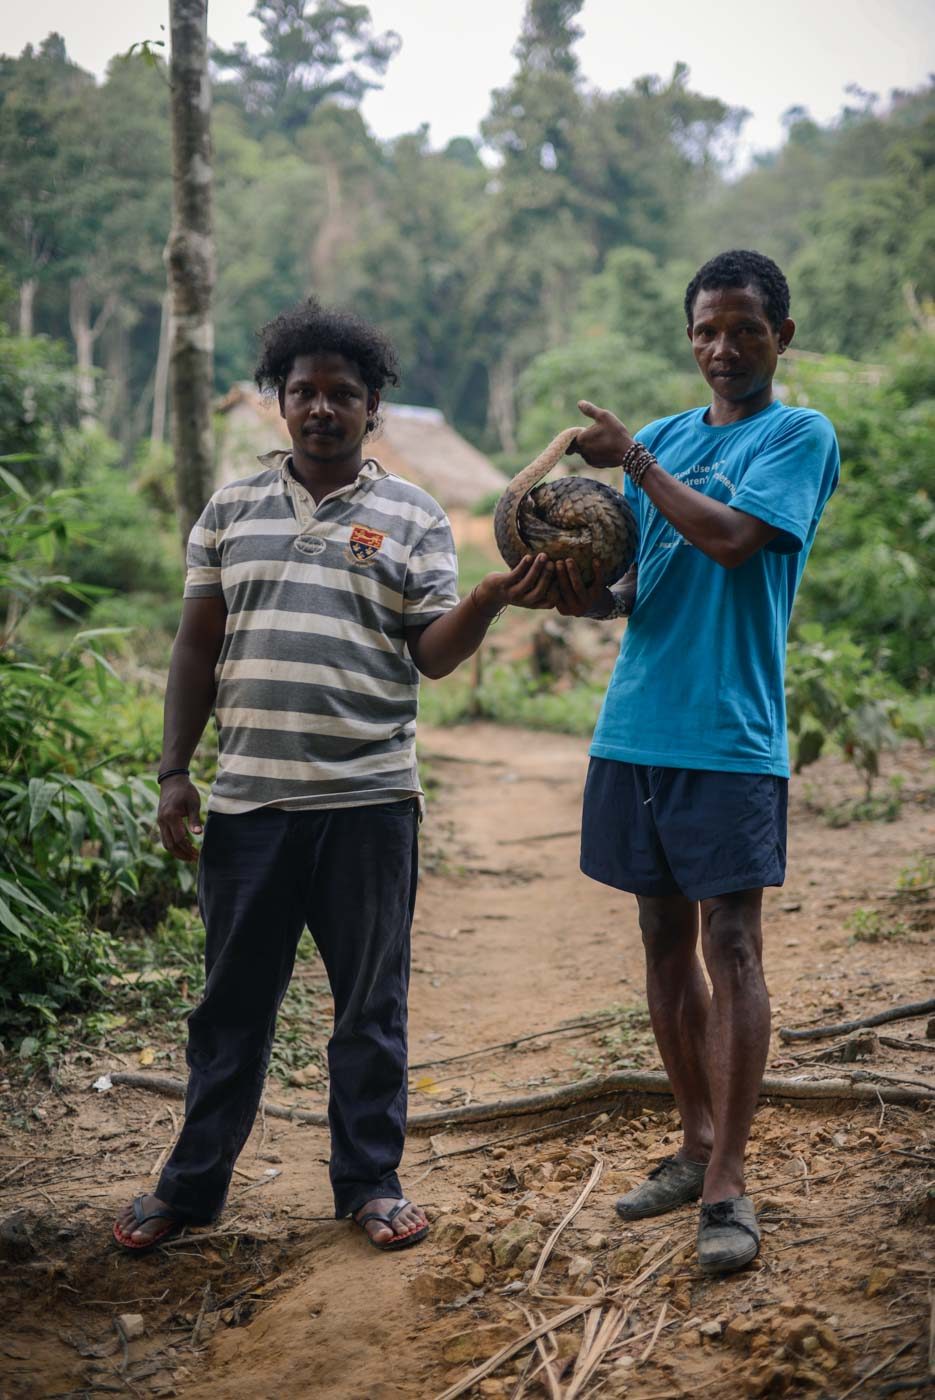 INDIGENOUS HUNTERS. Two hunters from the indigenous Temiar community in Peninsular Malaysia pose with a pangolin they had just caught the day before. The pangolin was later released. Photo by Puah Sze Ning/R.AGE 